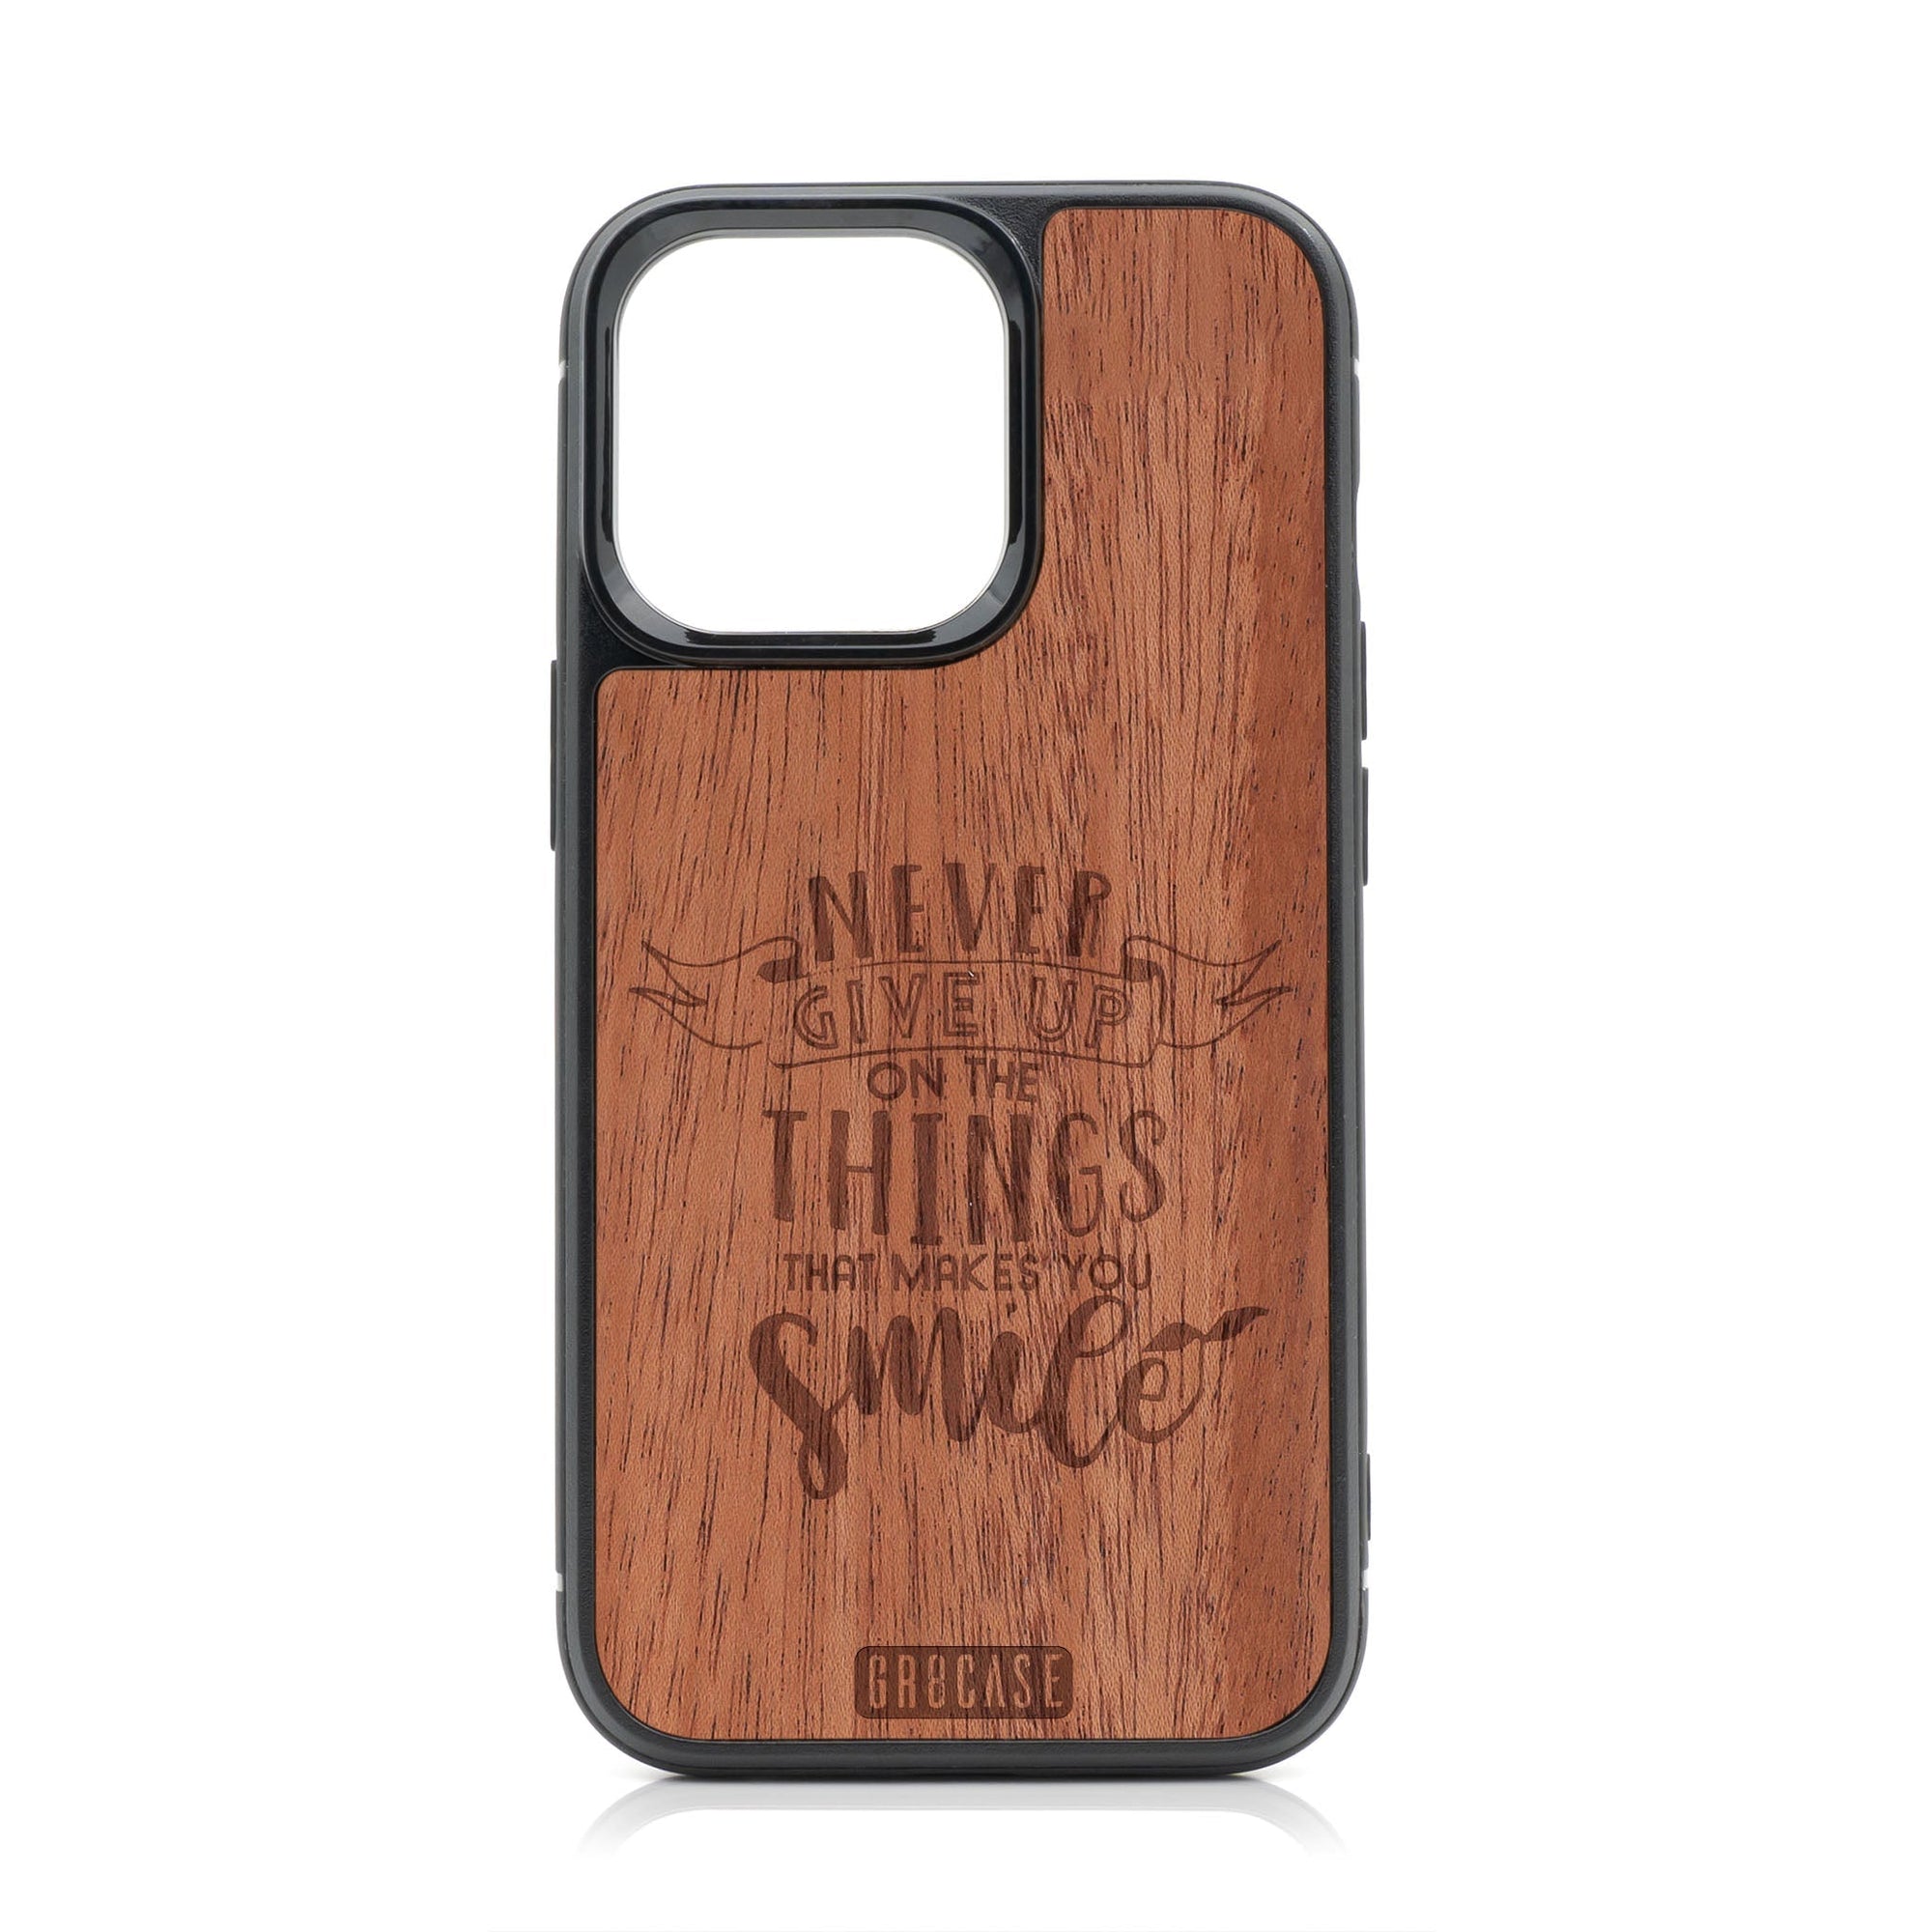 Never Give Up On The Things That Make You Smile Design Wood Case For iPhone 15 Pro